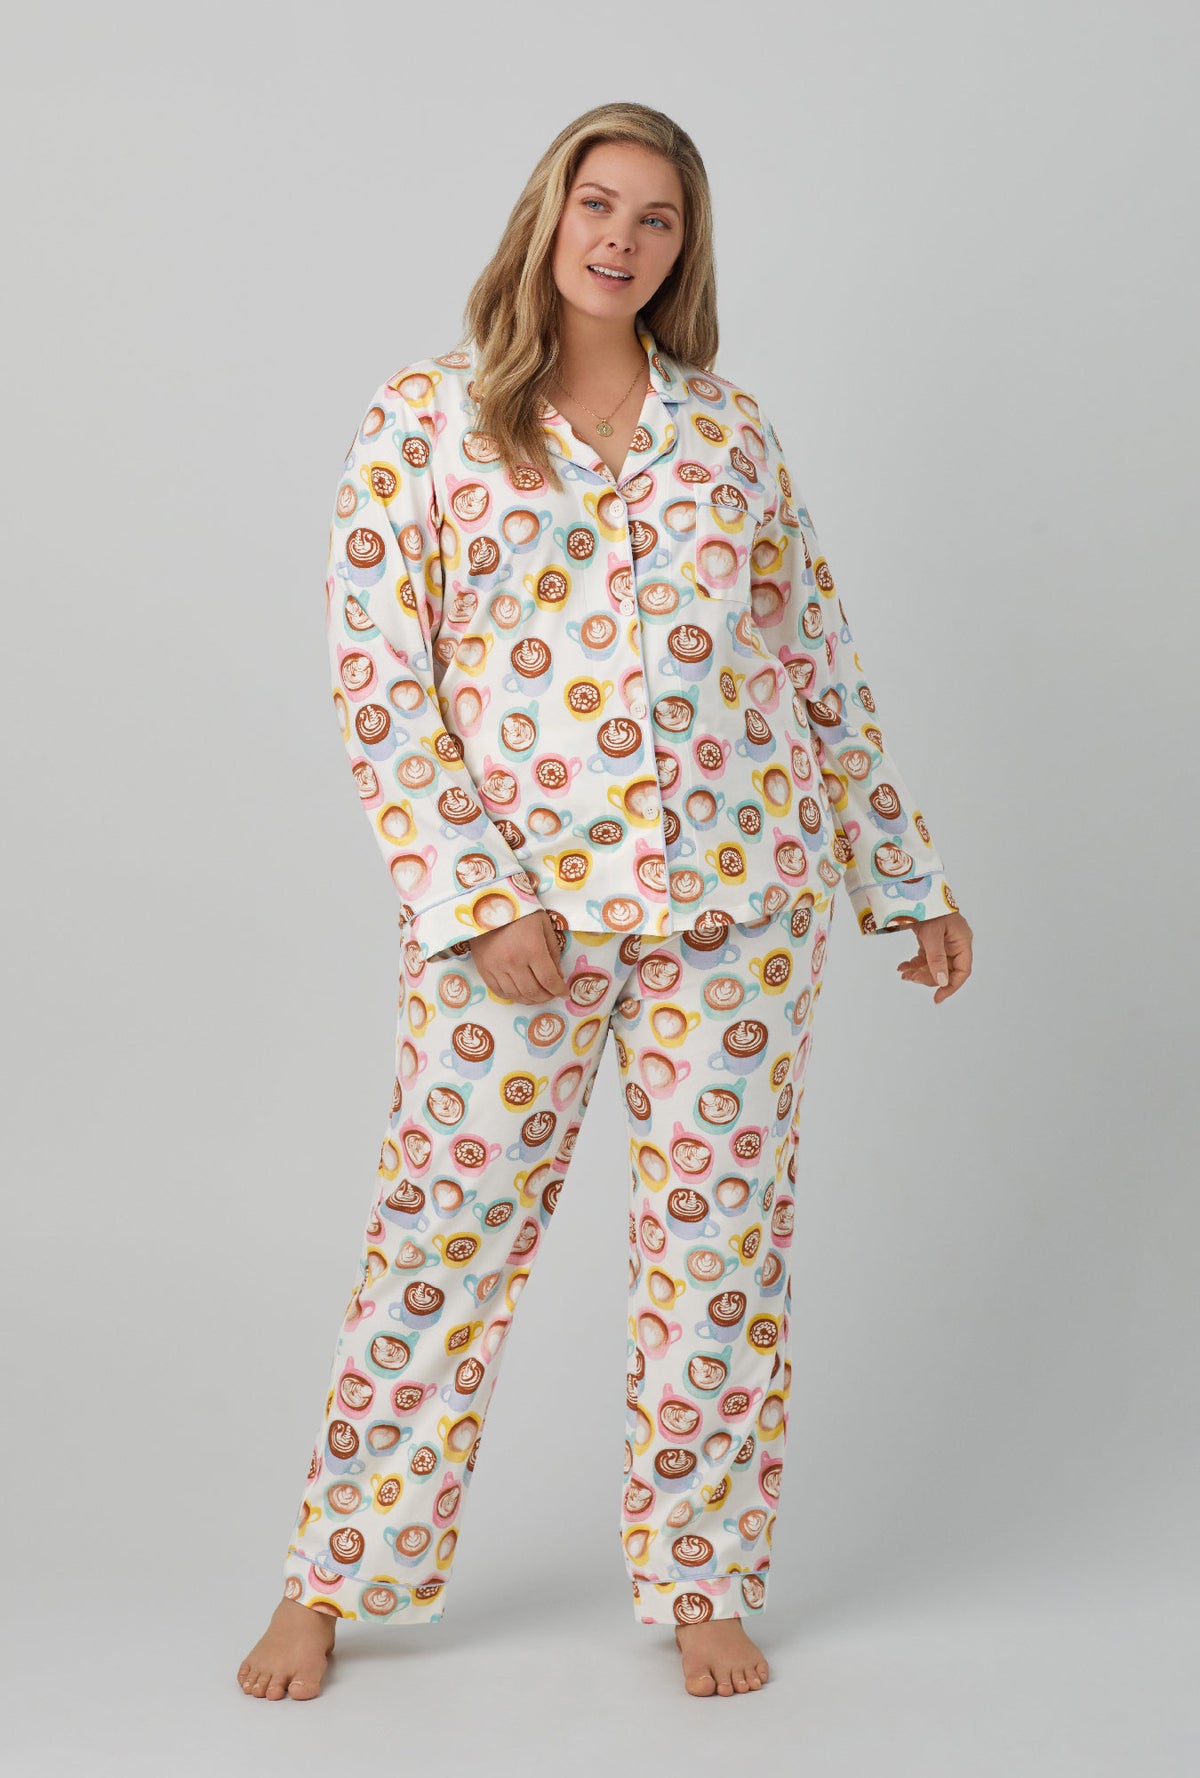 A lady wearing white long Sleeve Classic Stretch Jersey PJ Set with Lots of latte print